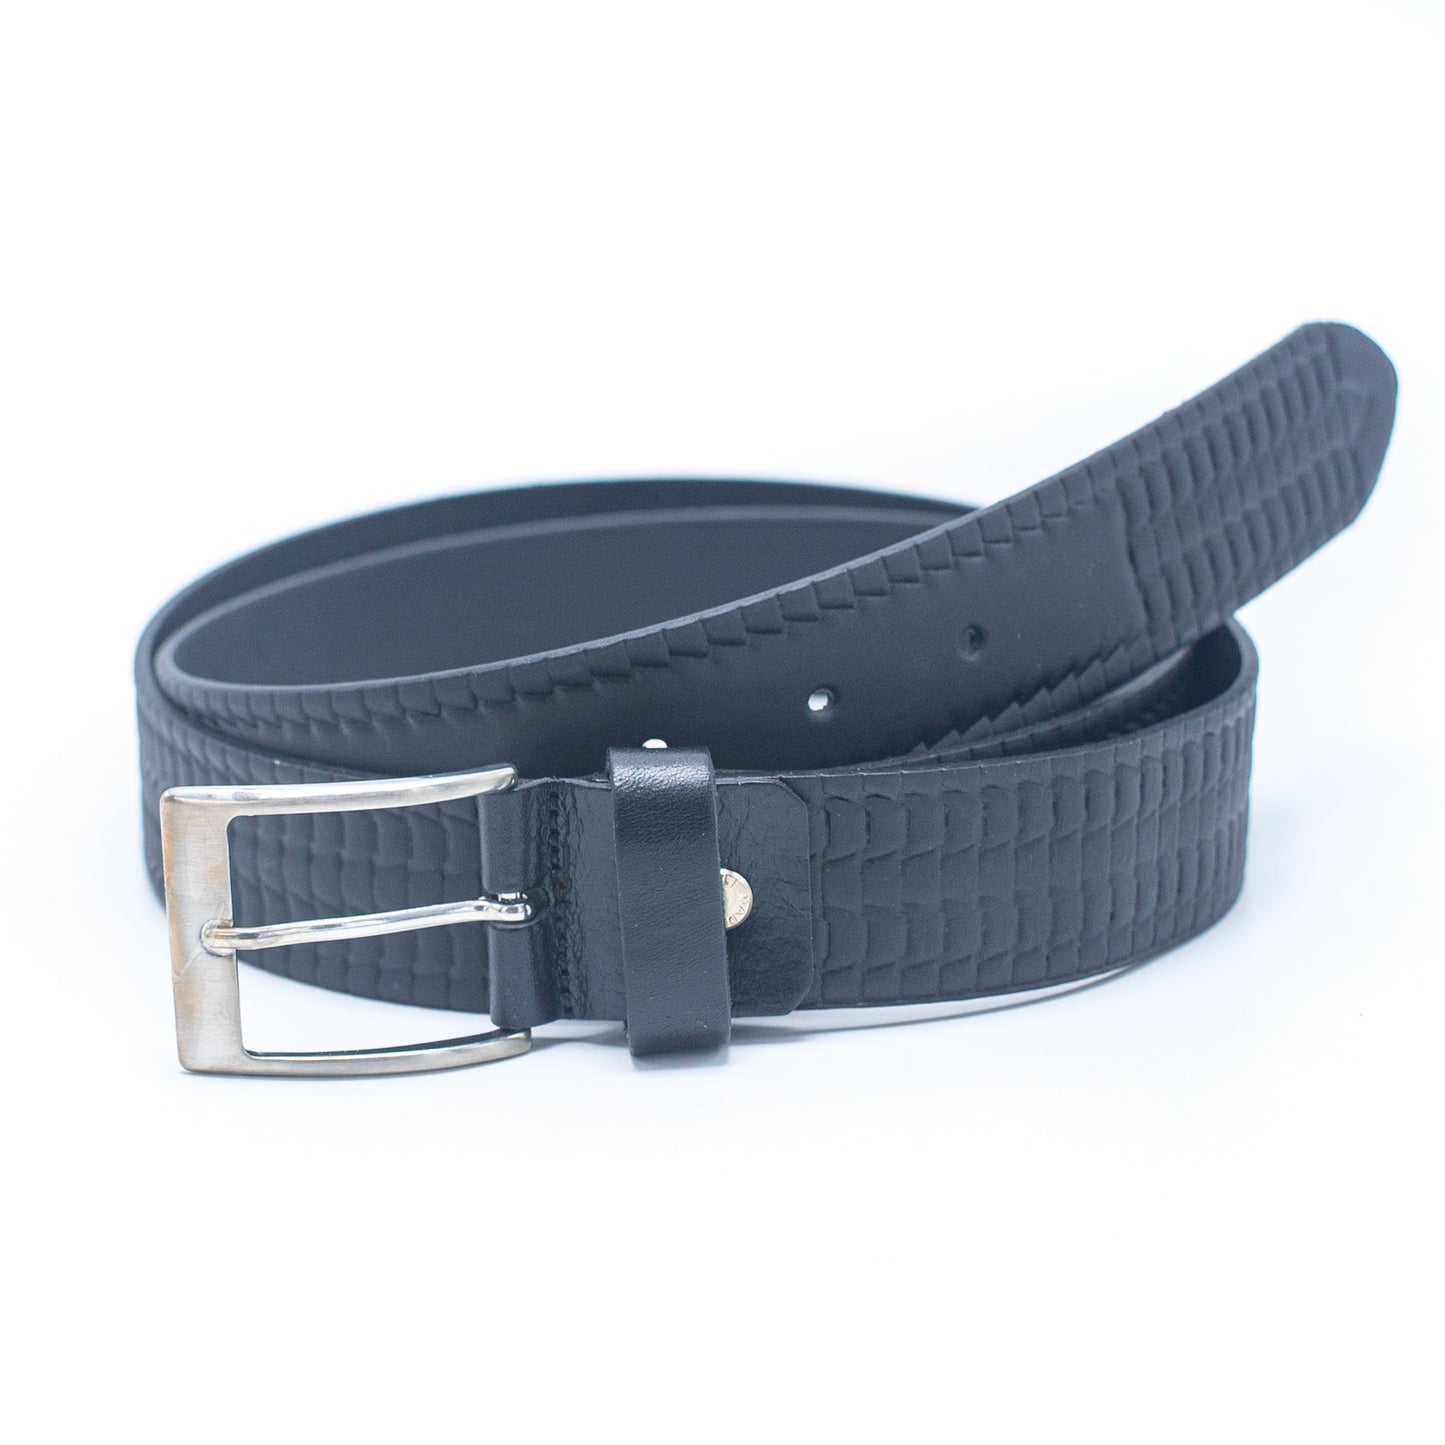 Copy of Made in Italy Genuine leather Men Belt LEL-15